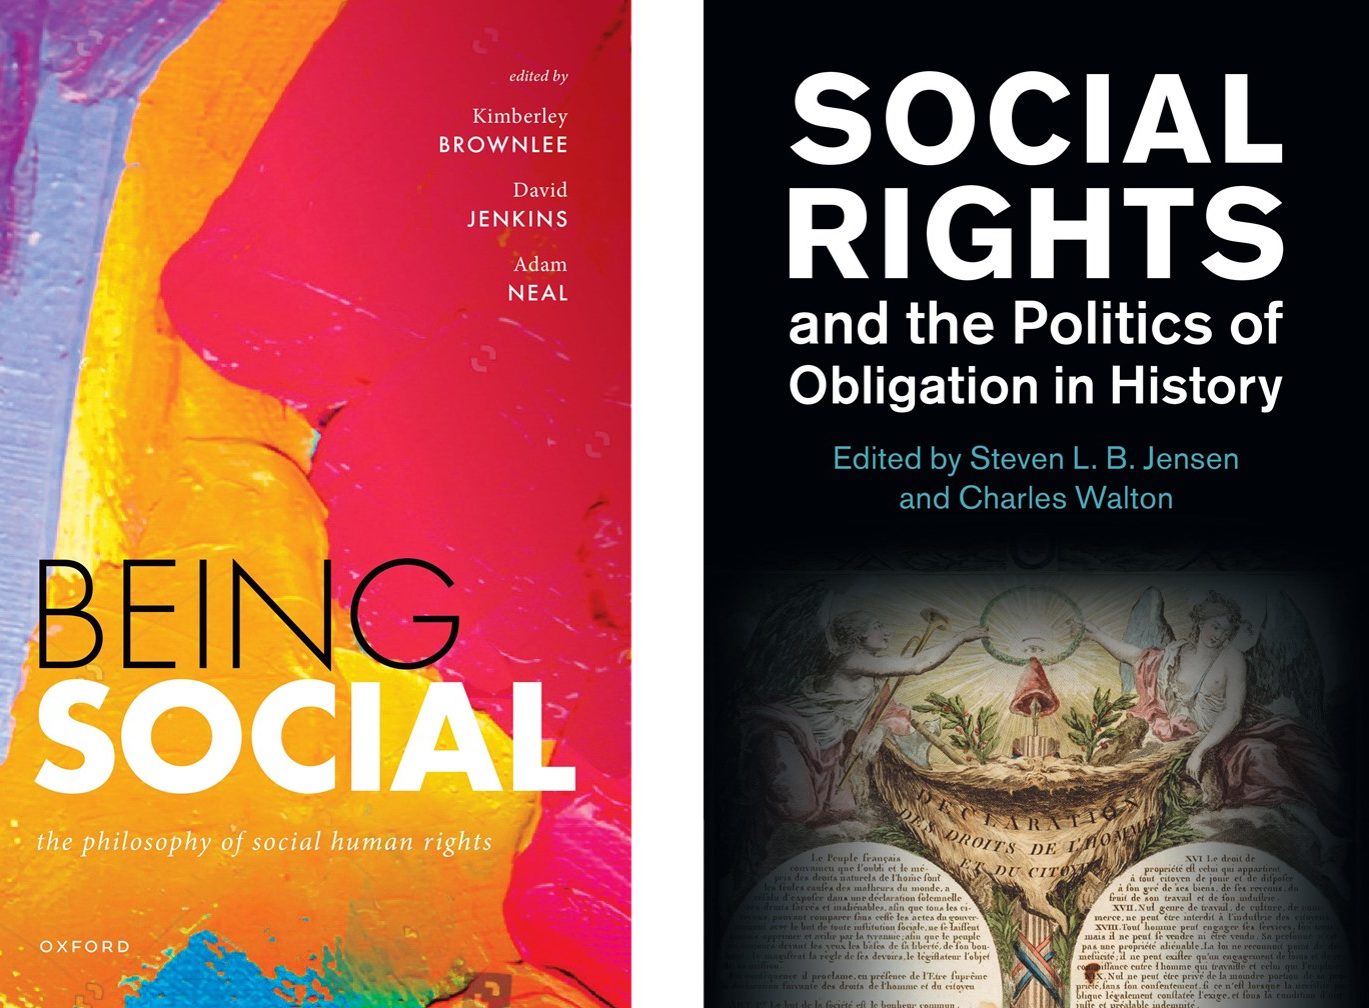 The History and Philosophy of Social Rights